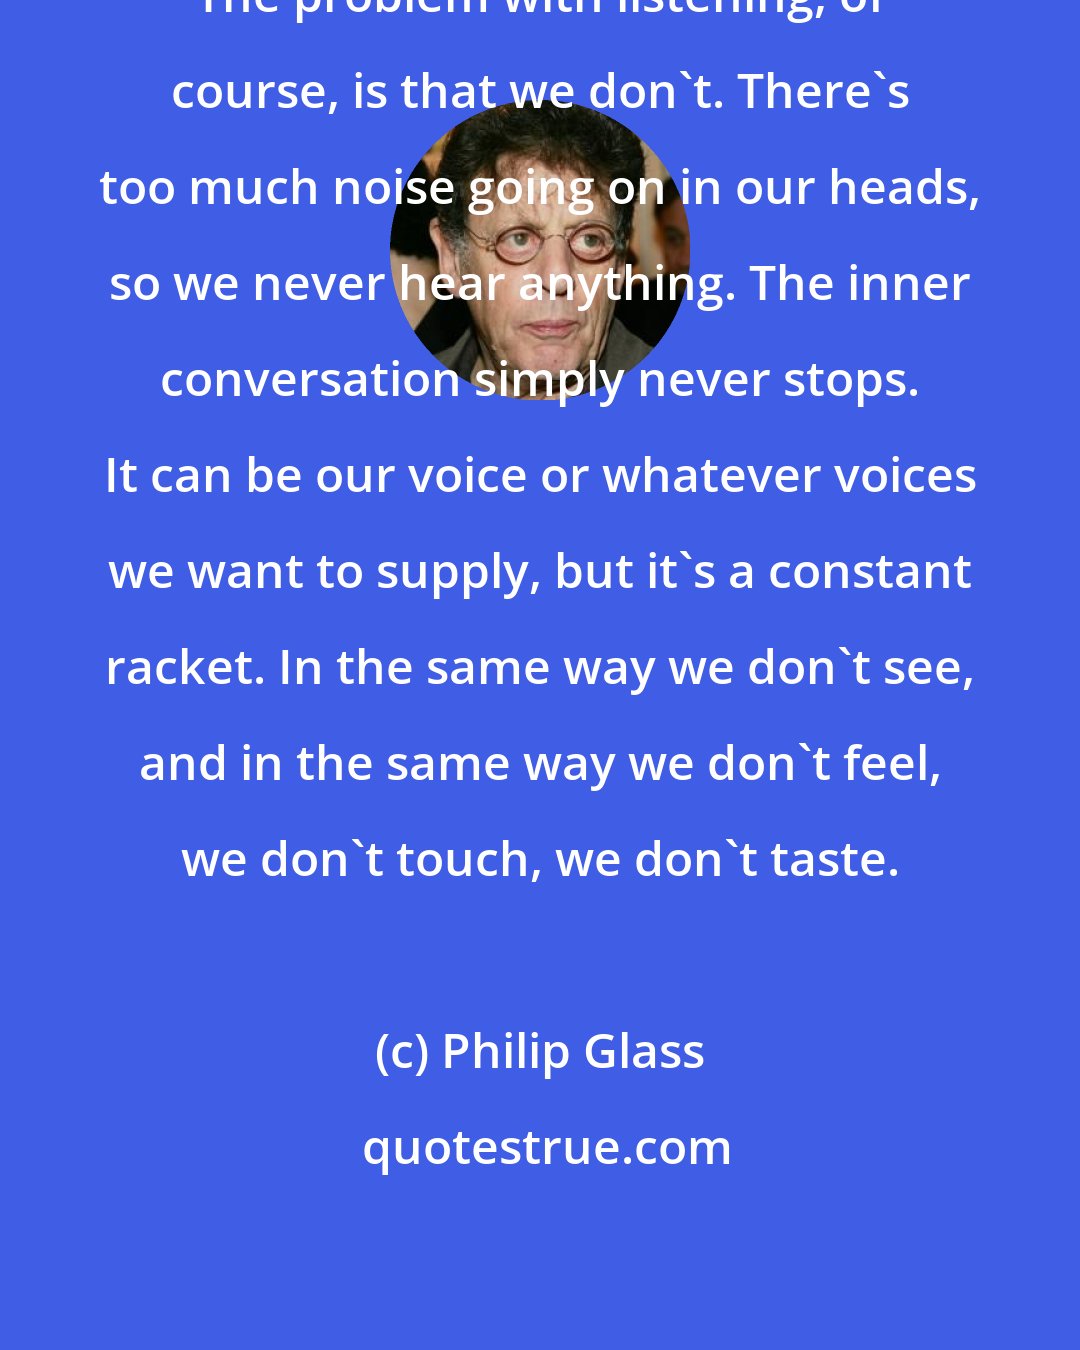 Philip Glass: The problem with listening, of course, is that we don't. There's too much noise going on in our heads, so we never hear anything. The inner conversation simply never stops. It can be our voice or whatever voices we want to supply, but it's a constant racket. In the same way we don't see, and in the same way we don't feel, we don't touch, we don't taste.